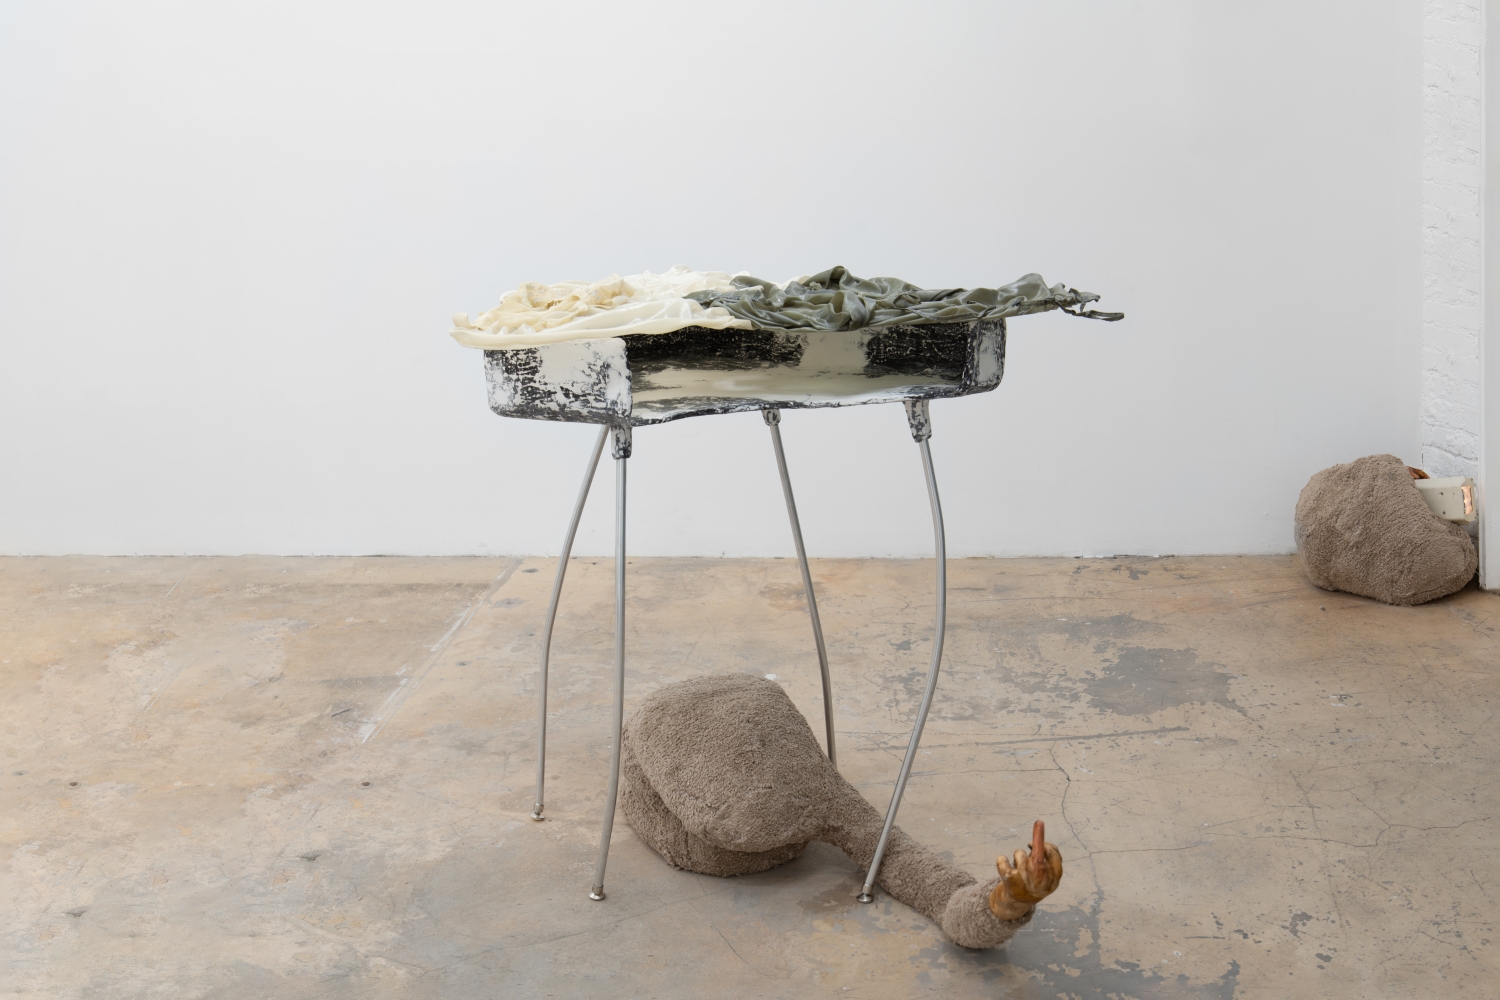 Catalina Ouyang
risk assessment (but, but what made me do the bad thing?), 2019
plaster, steel, burlap, pigment, carpet, symbiotic colonies of bacteria and yeast, garments, epoxy resin, enamel paint, aluminum, chair glides, abandoned security camera, mothballs, lightbulb
dimensions variable
CO003